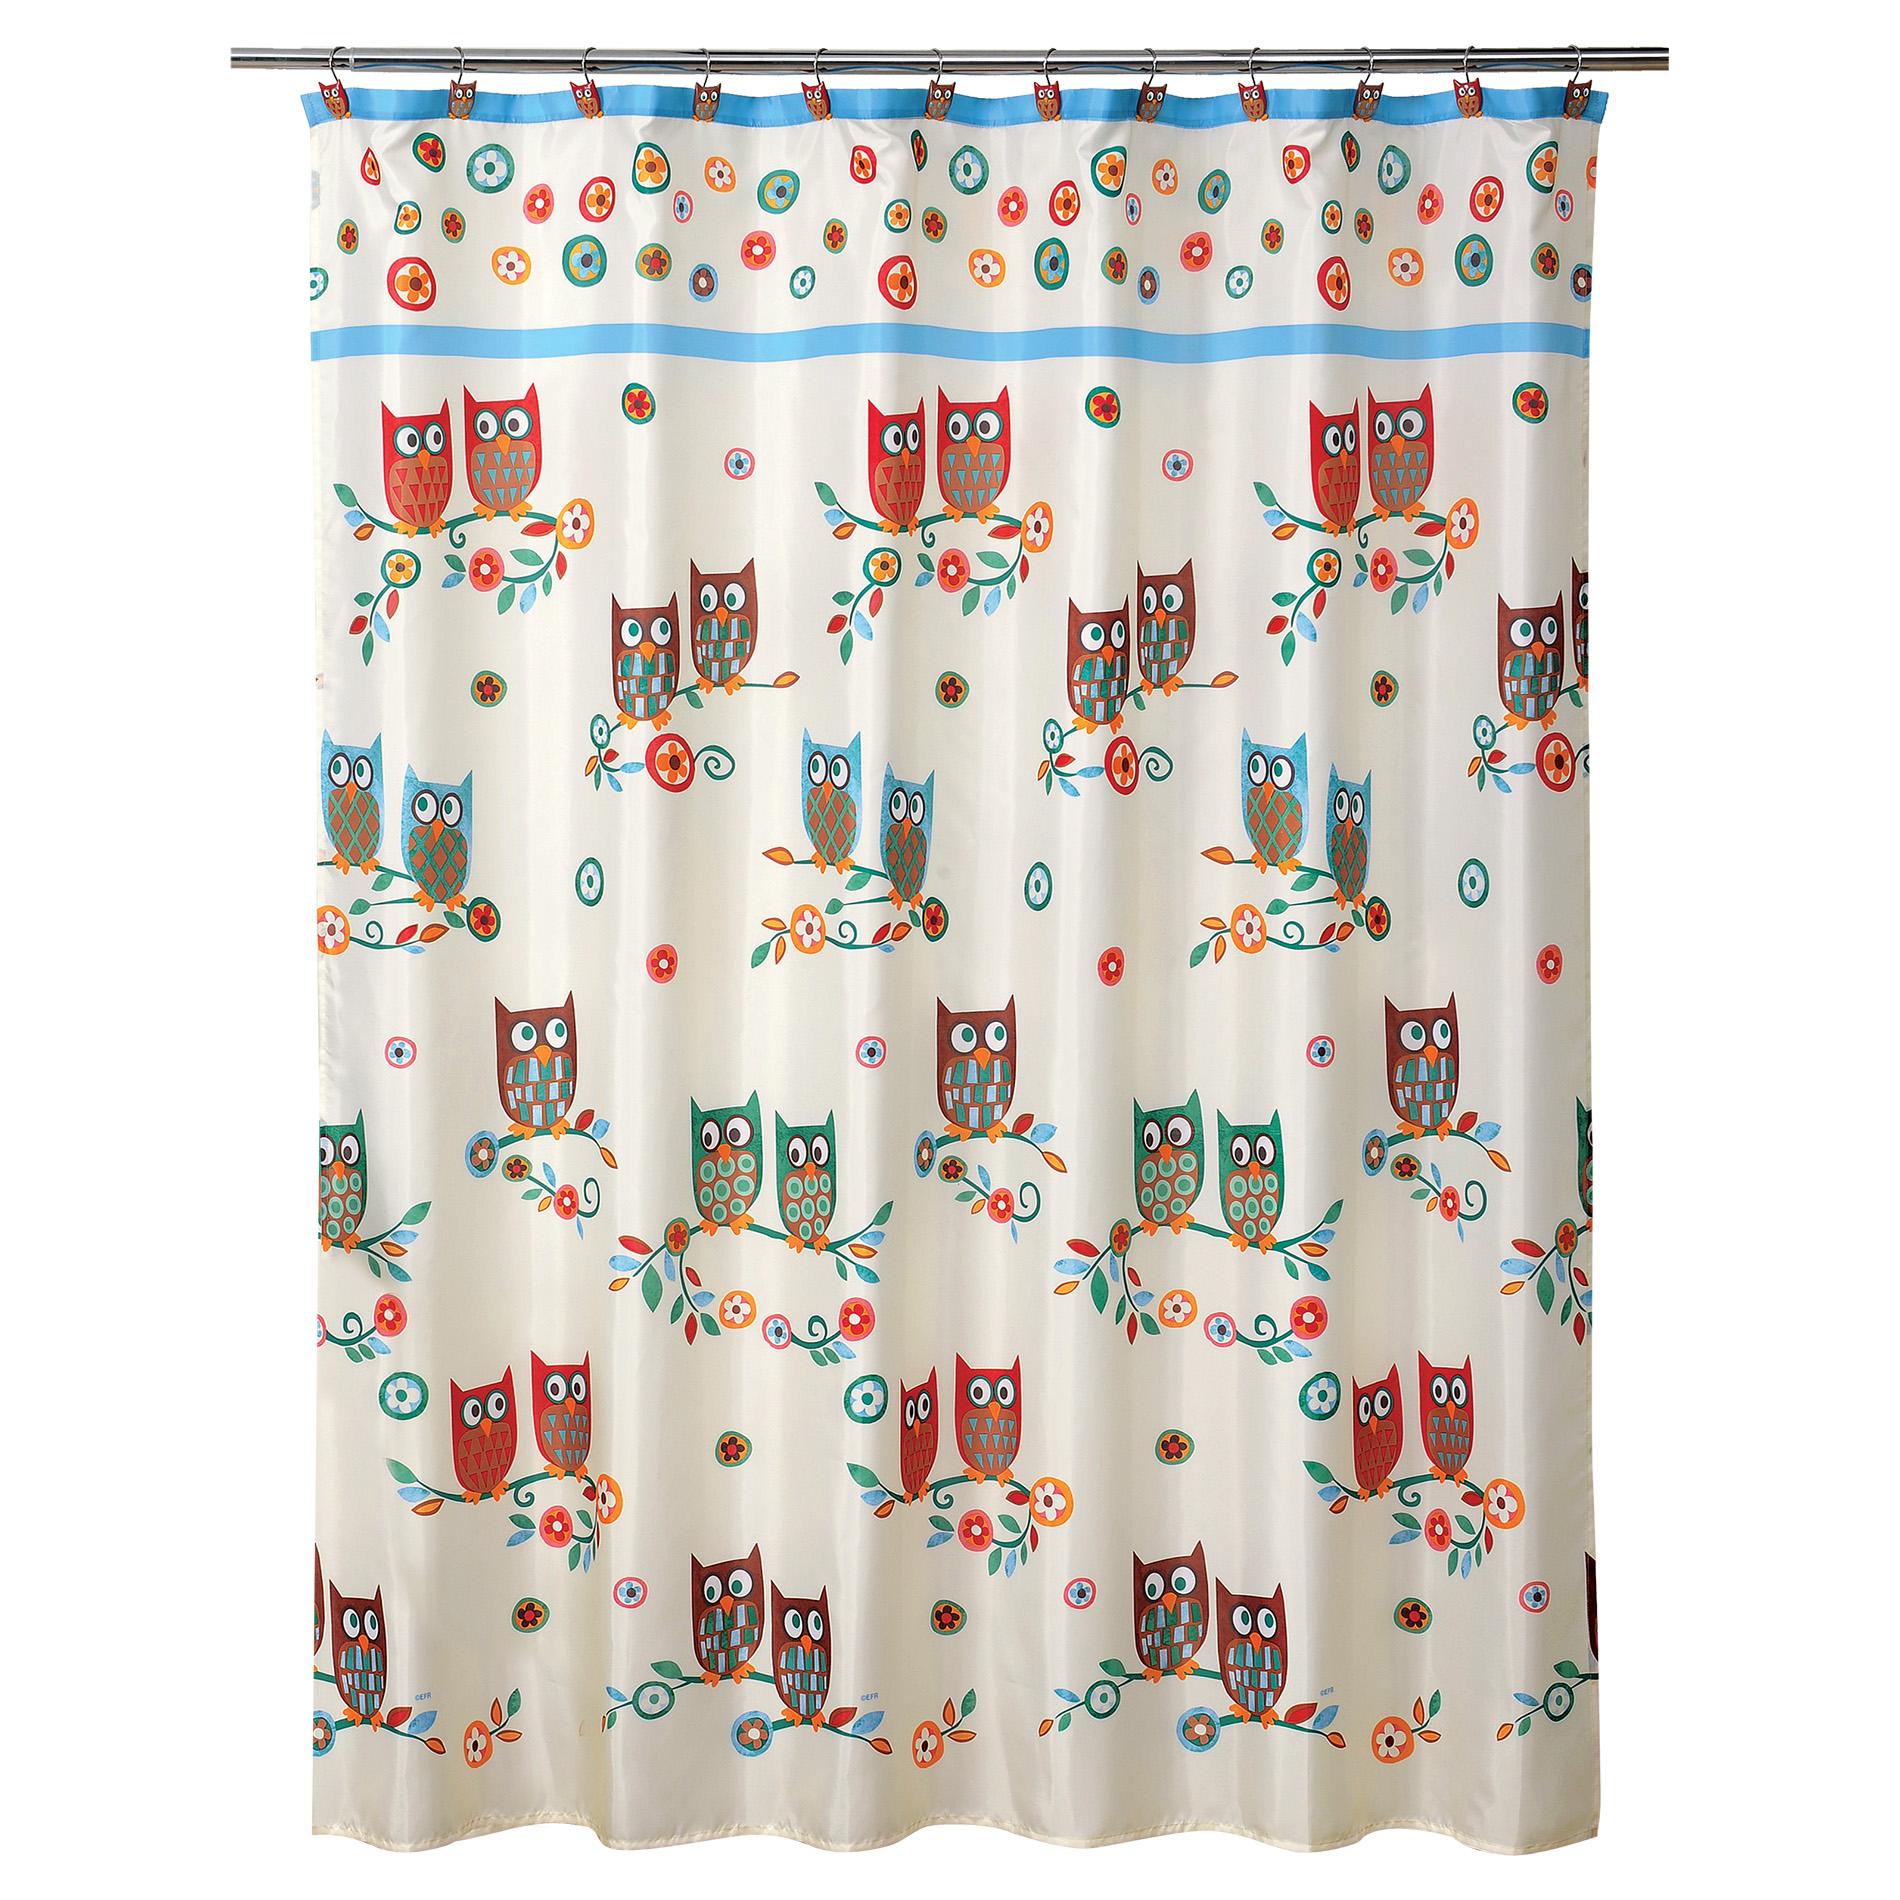 Colormate Owl Garden Shower Curtain